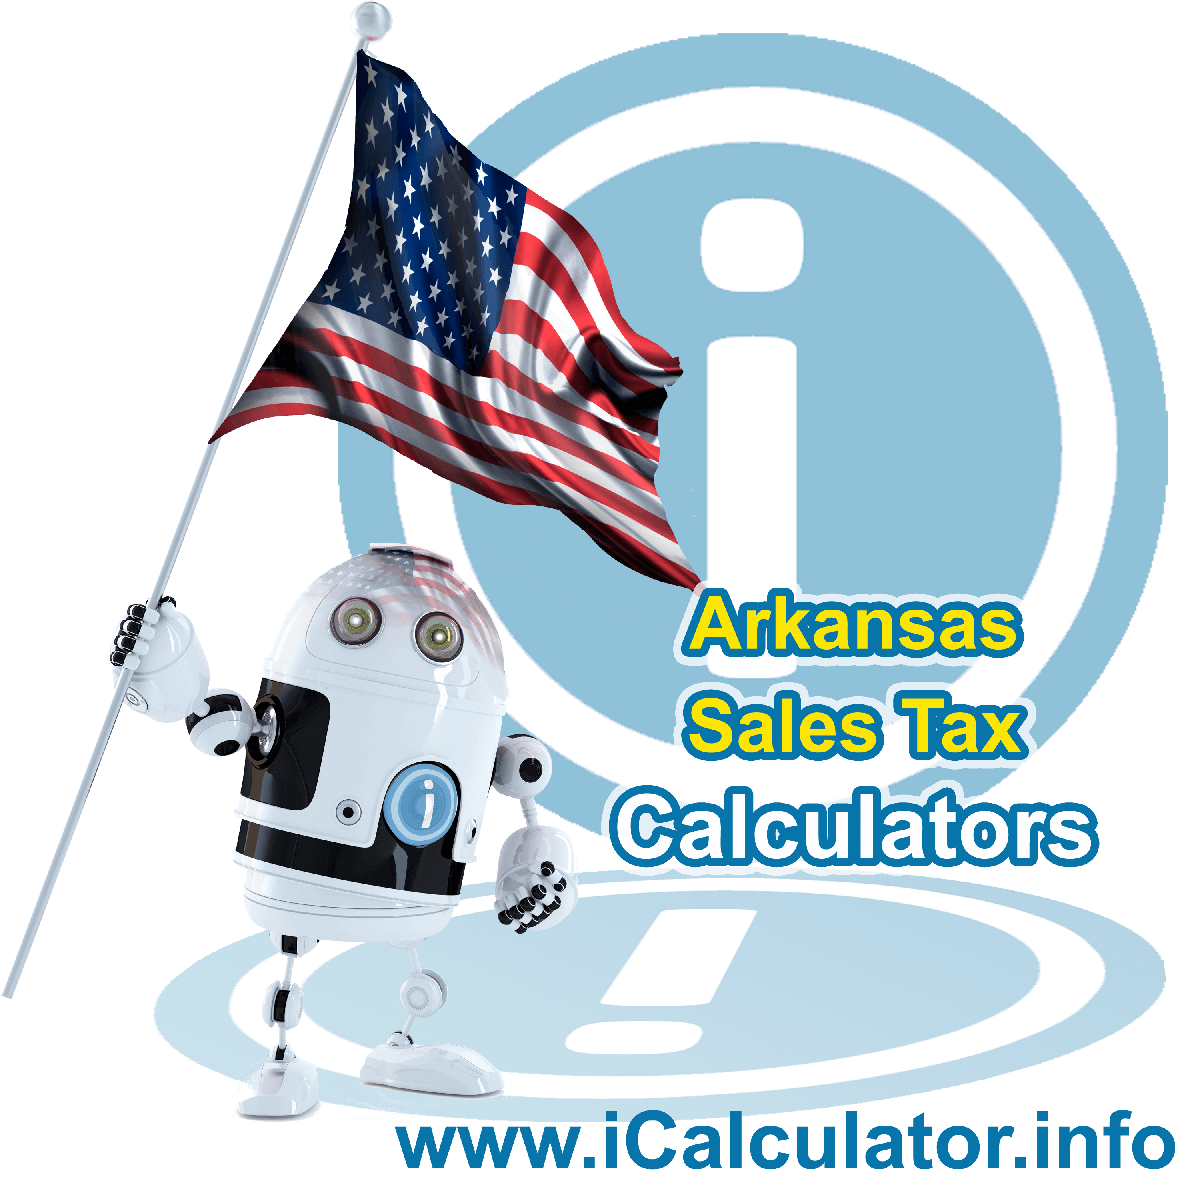 Charleston Sales Rates: This image illustrates a calculator robot calculating Charleston sales tax manually using the Charleston Sales Tax Formula. You can use this information to calculate Charleston Sales Tax manually or use the Charleston Sales Tax Calculator to calculate sales tax online.